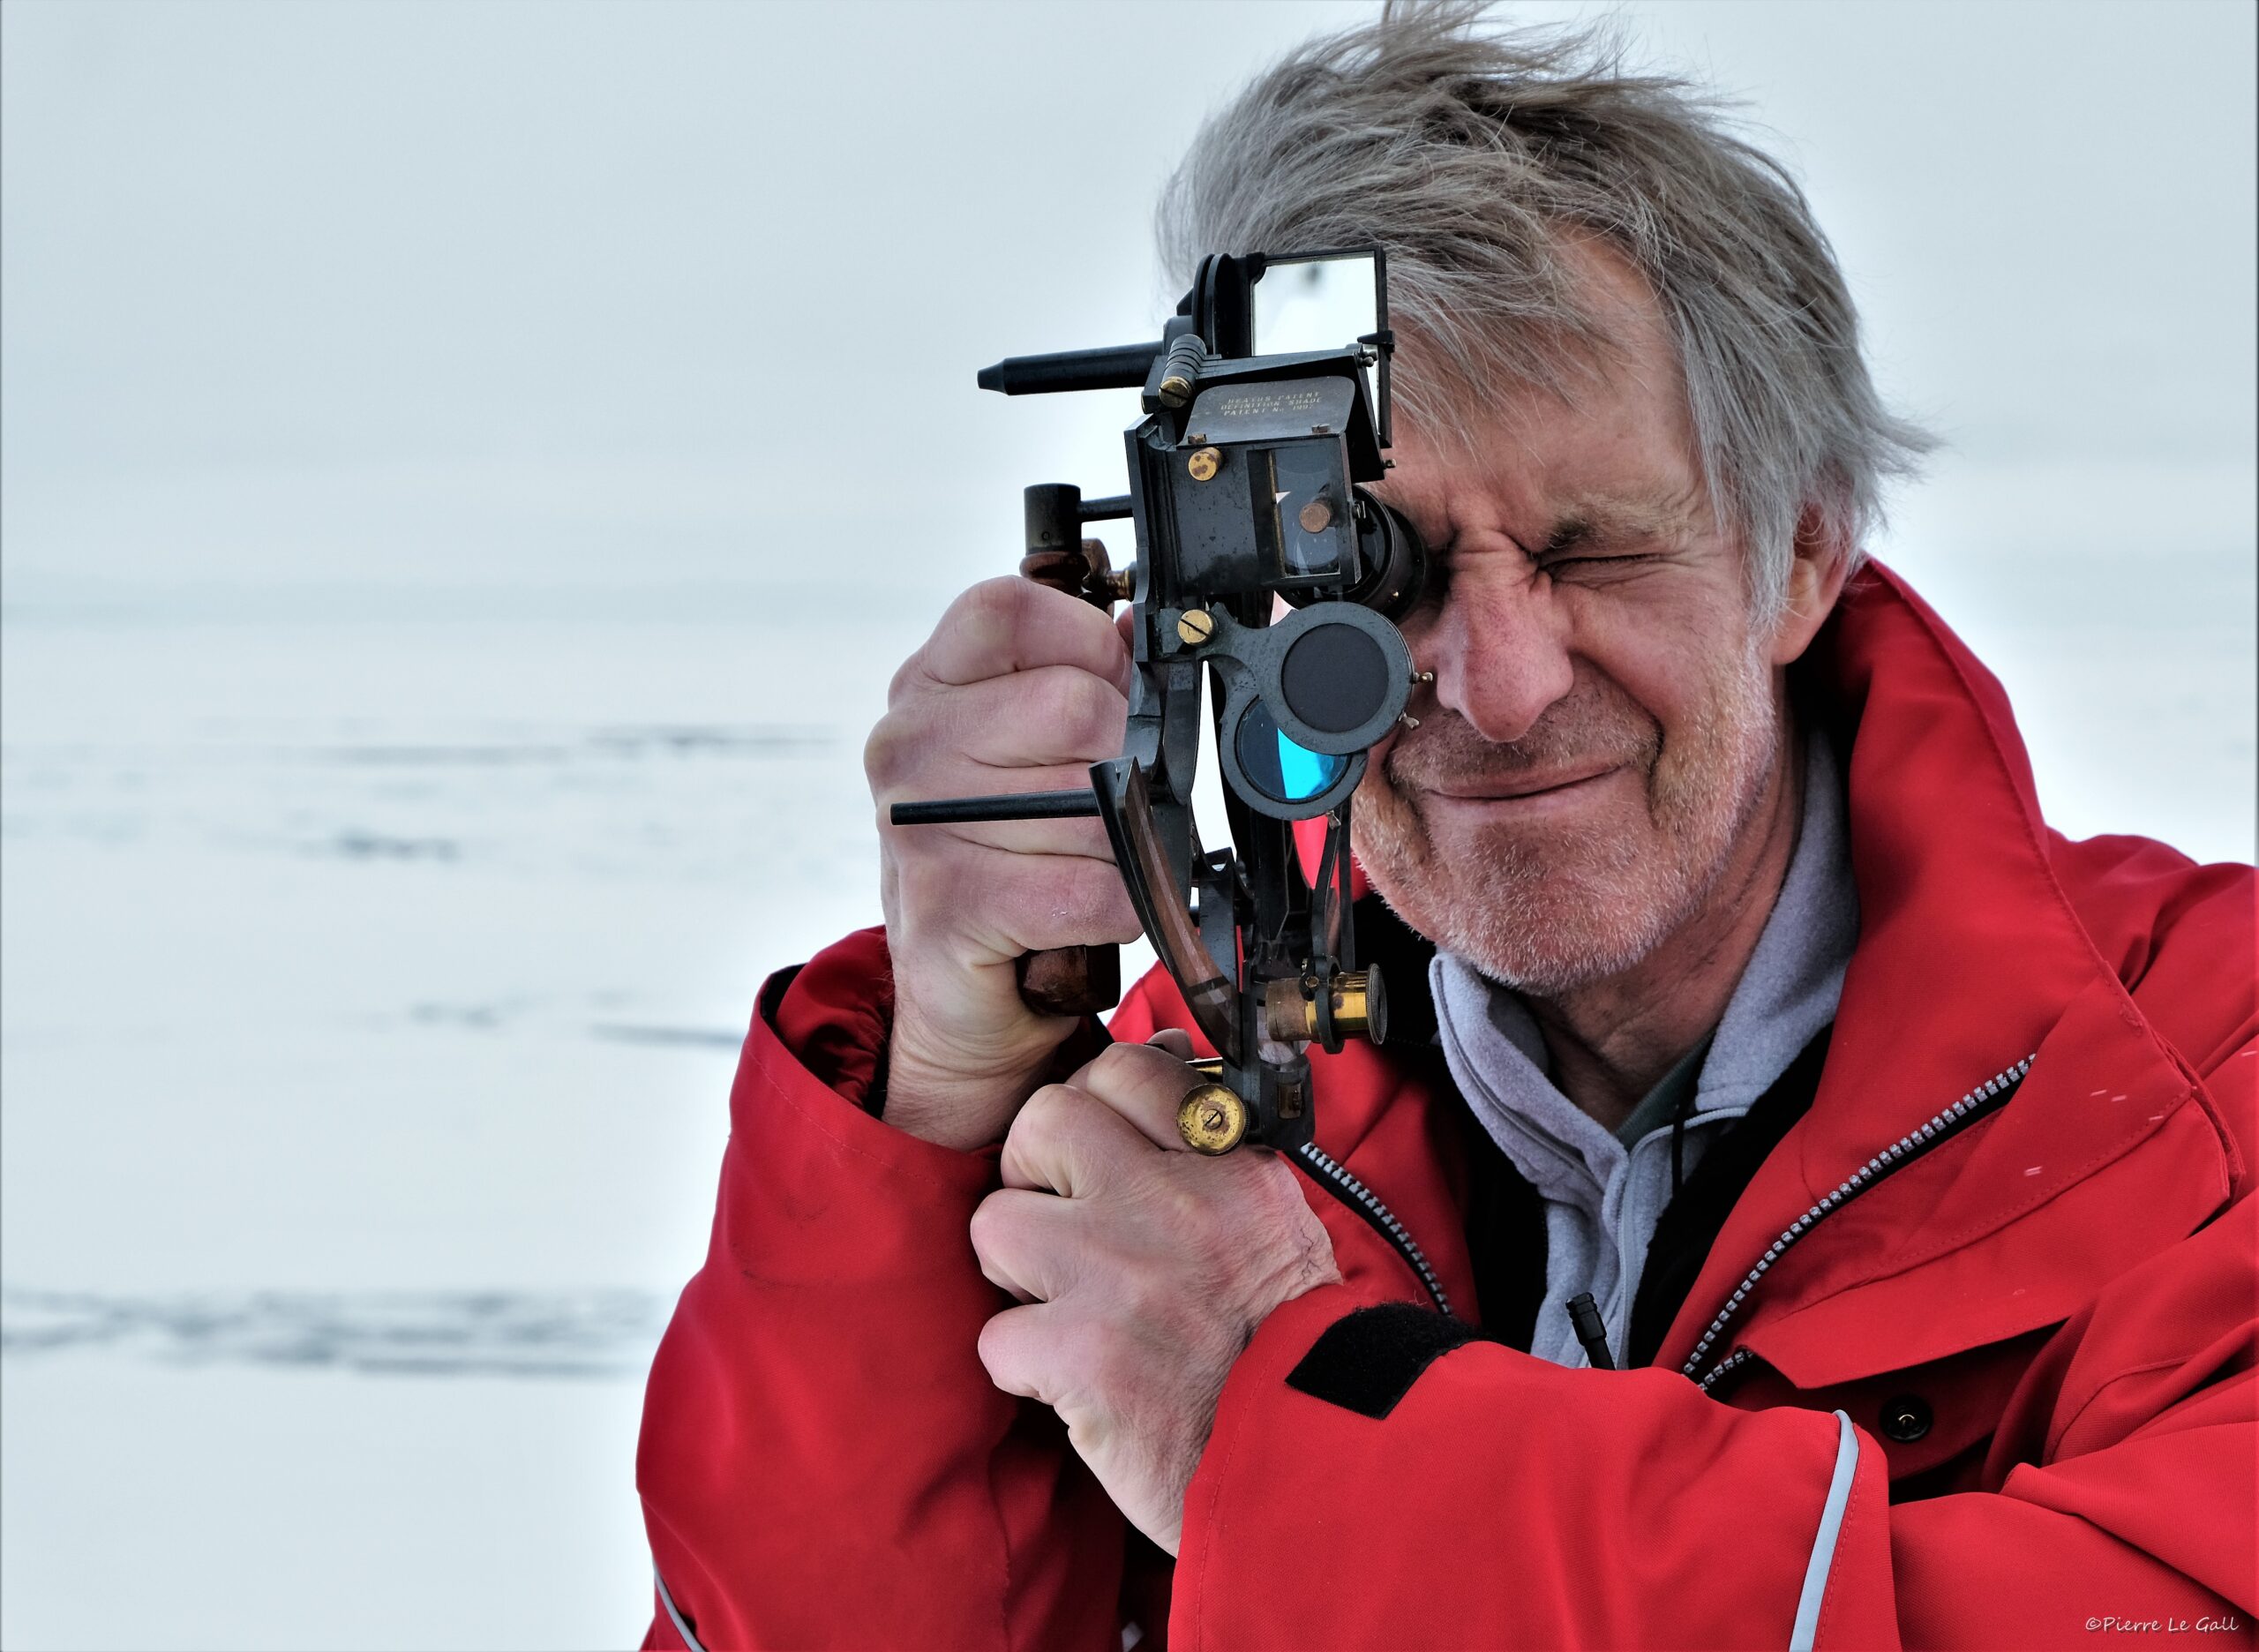 A man wearing a red parka coat takes an angle on the sun with a sextant.